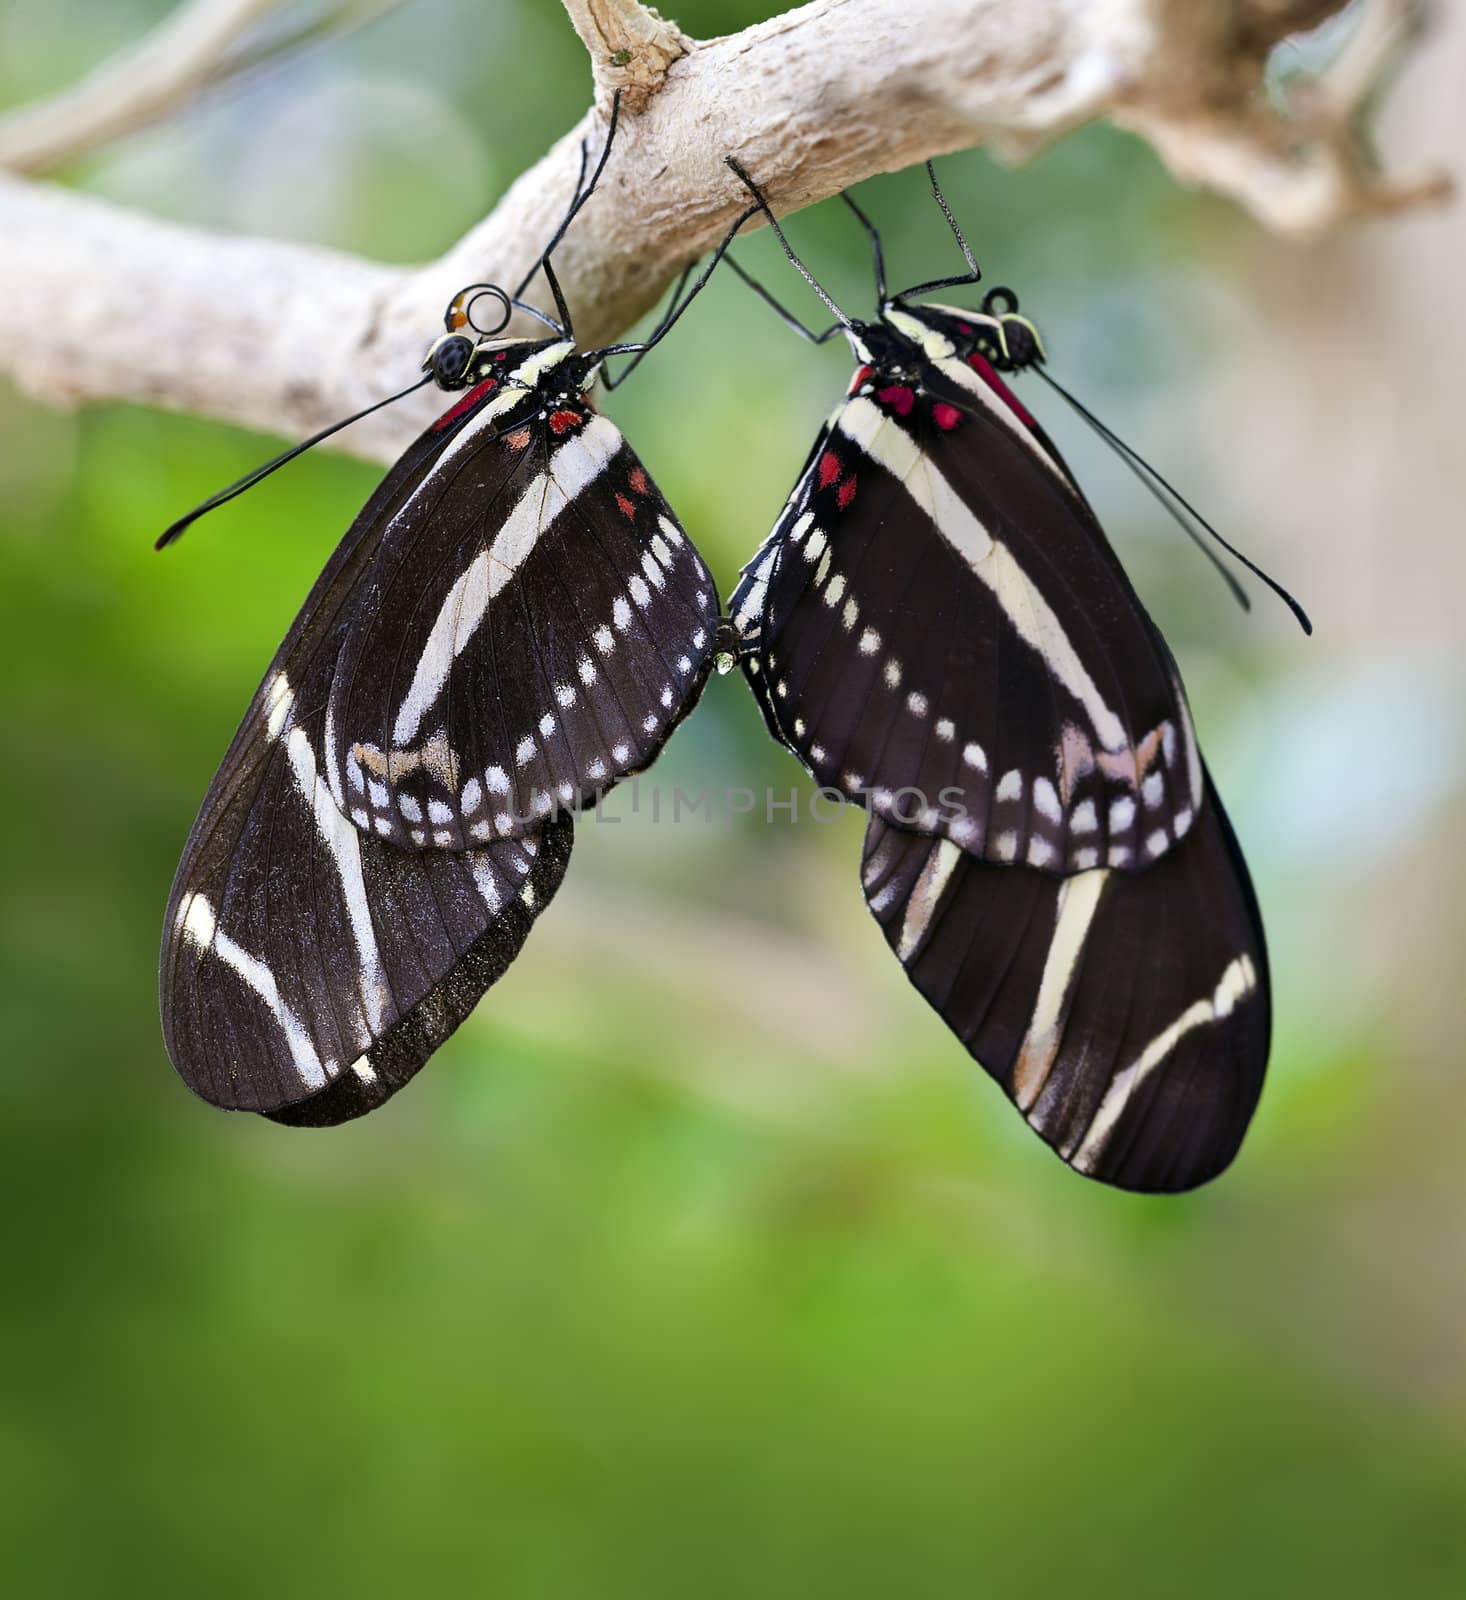 A close up shot of a pair of mating Zebra Longwing Butterflies (Heliconius charithonia).